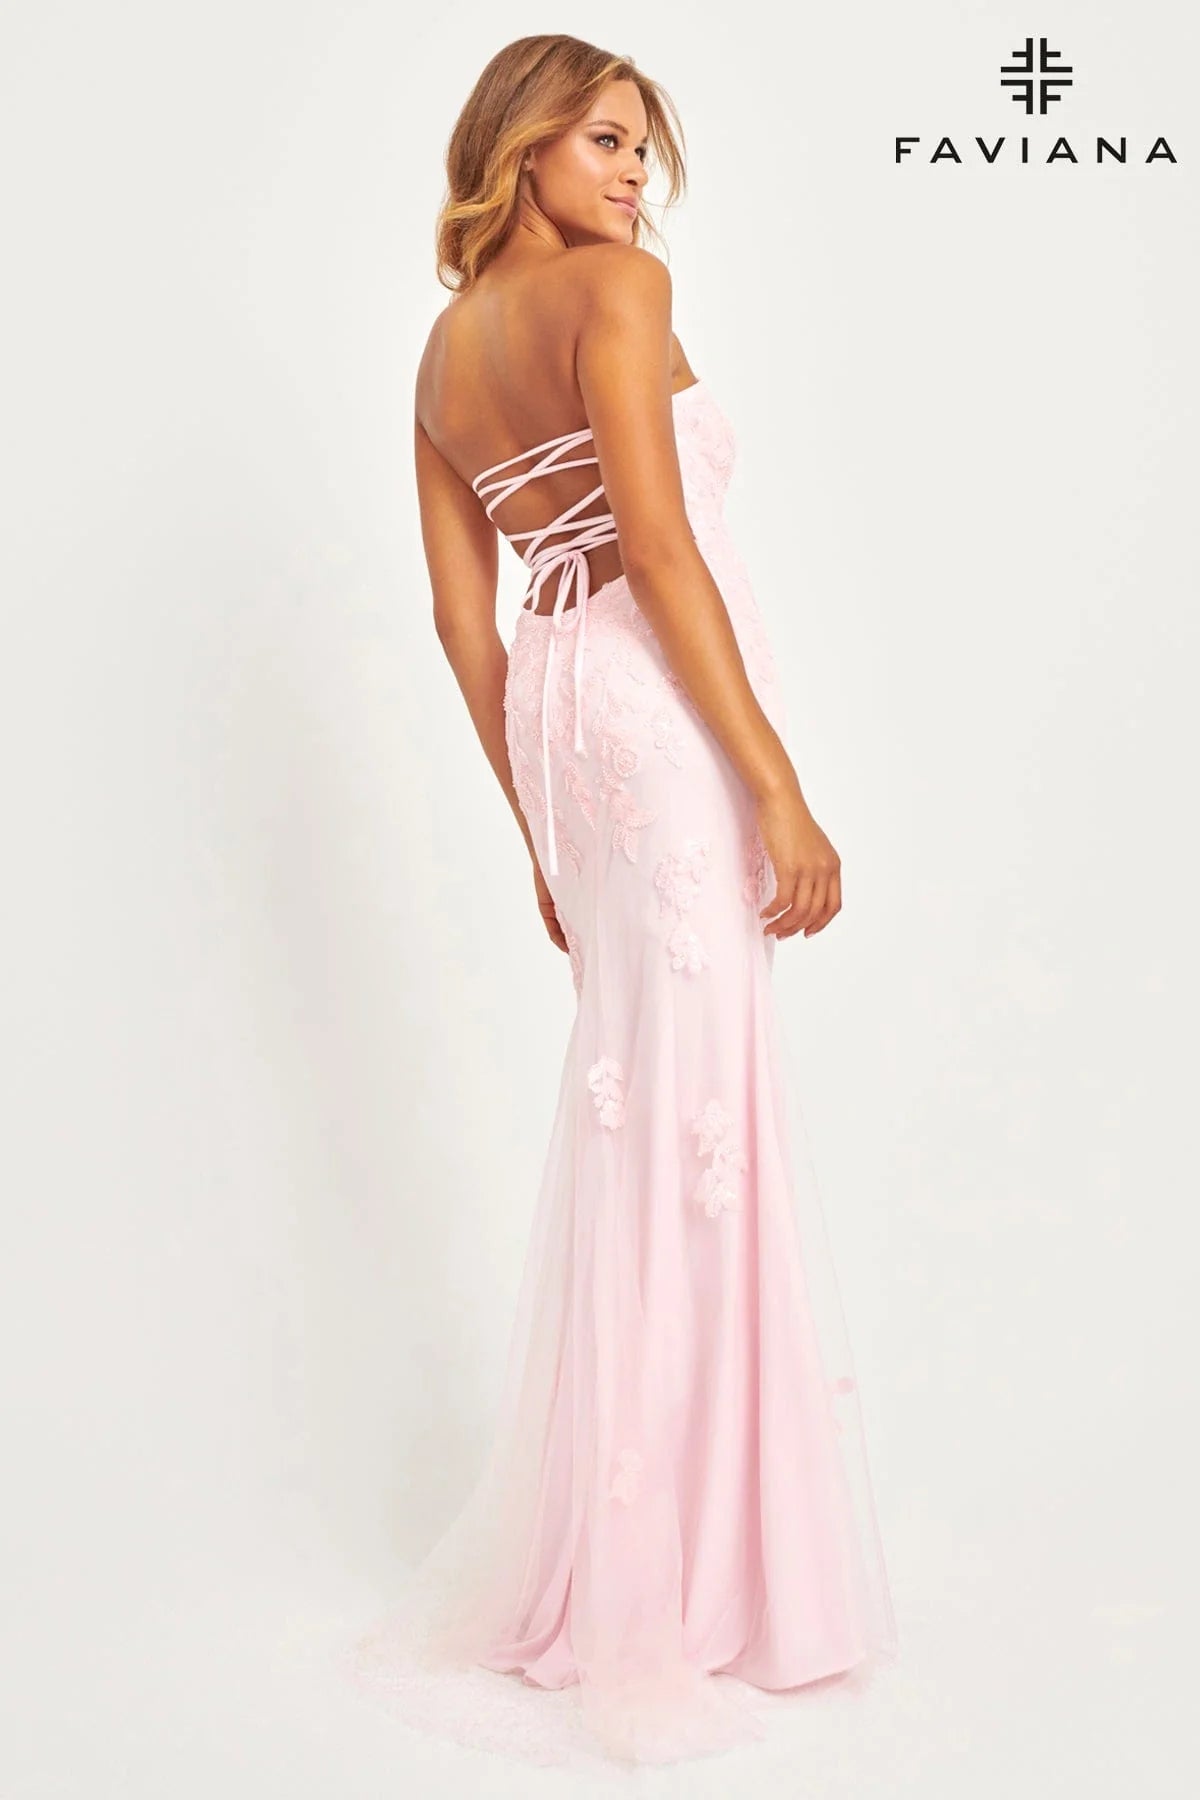 Strapless Light Pink Tulle And Lace Appliqué Dress For Prom